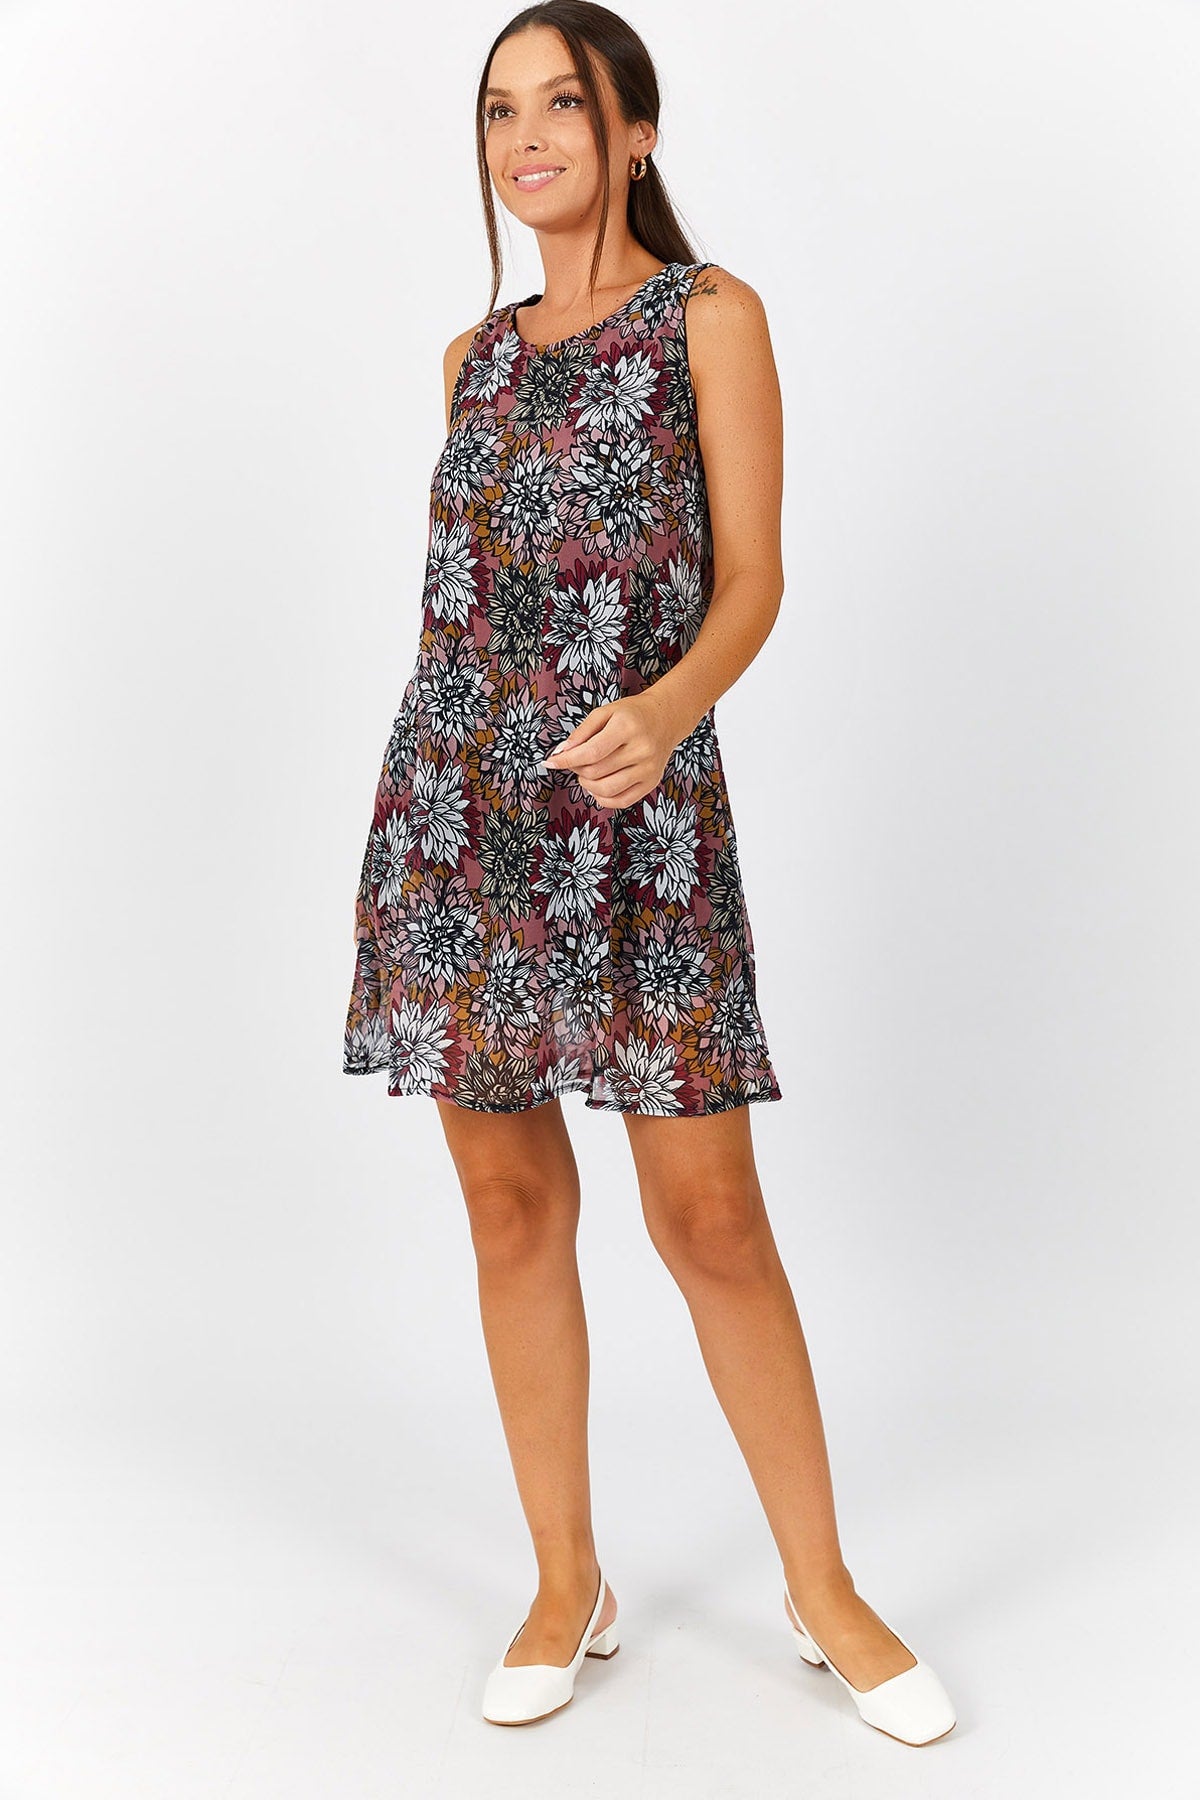 WOMEN'S ROSE DRIVER PATTERNED LINE CHICON DRESS ARM-221132